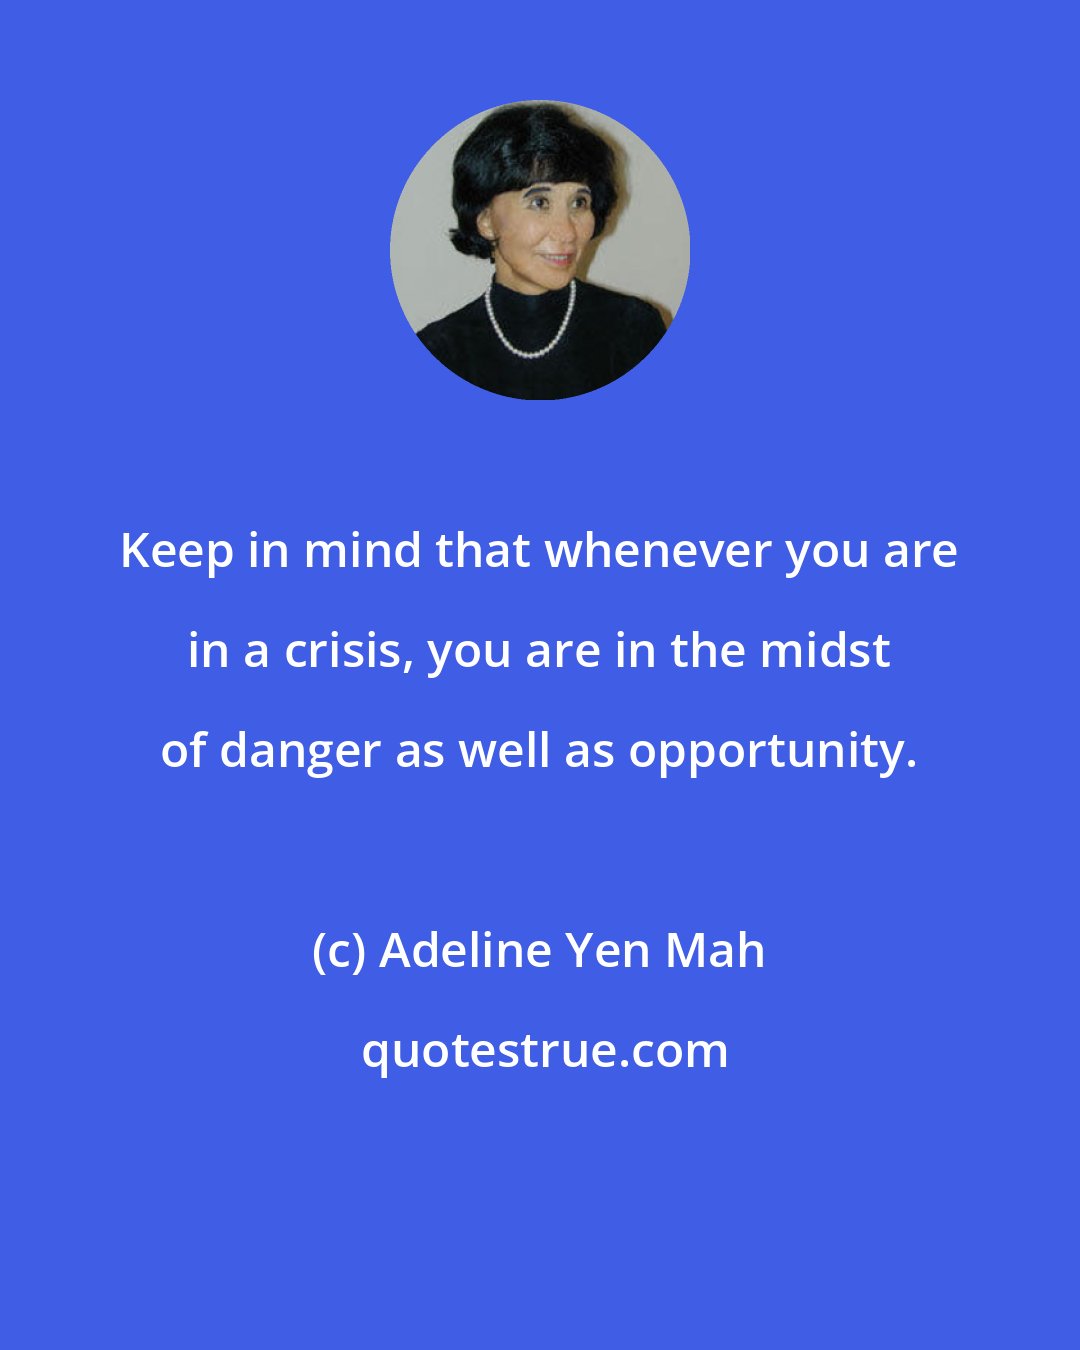 Adeline Yen Mah: Keep in mind that whenever you are in a crisis, you are in the midst of danger as well as opportunity.